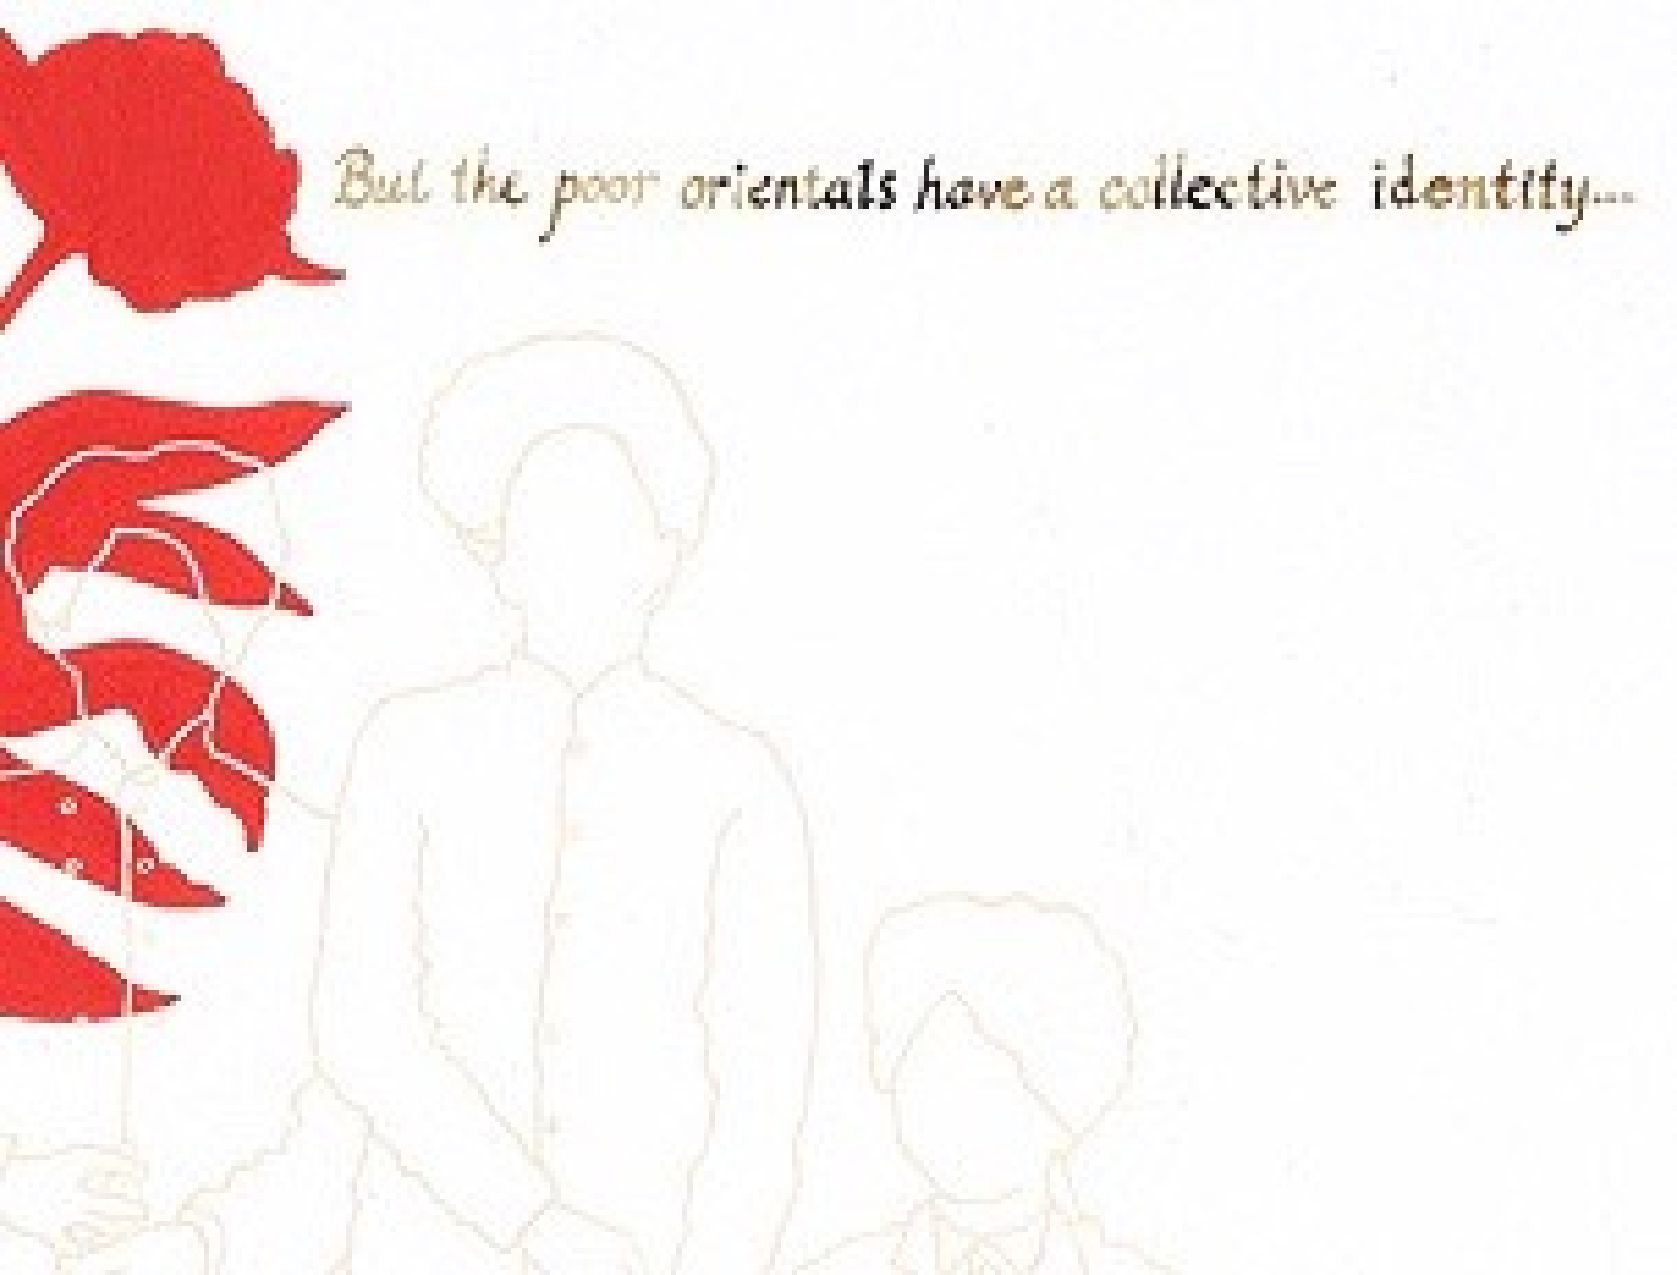 Detail of 'Of Birds and Fourteen Year Olds': on the left, a red blossom; line drawings of two children and the phrase in English "But poor orientals have a collective identity..."